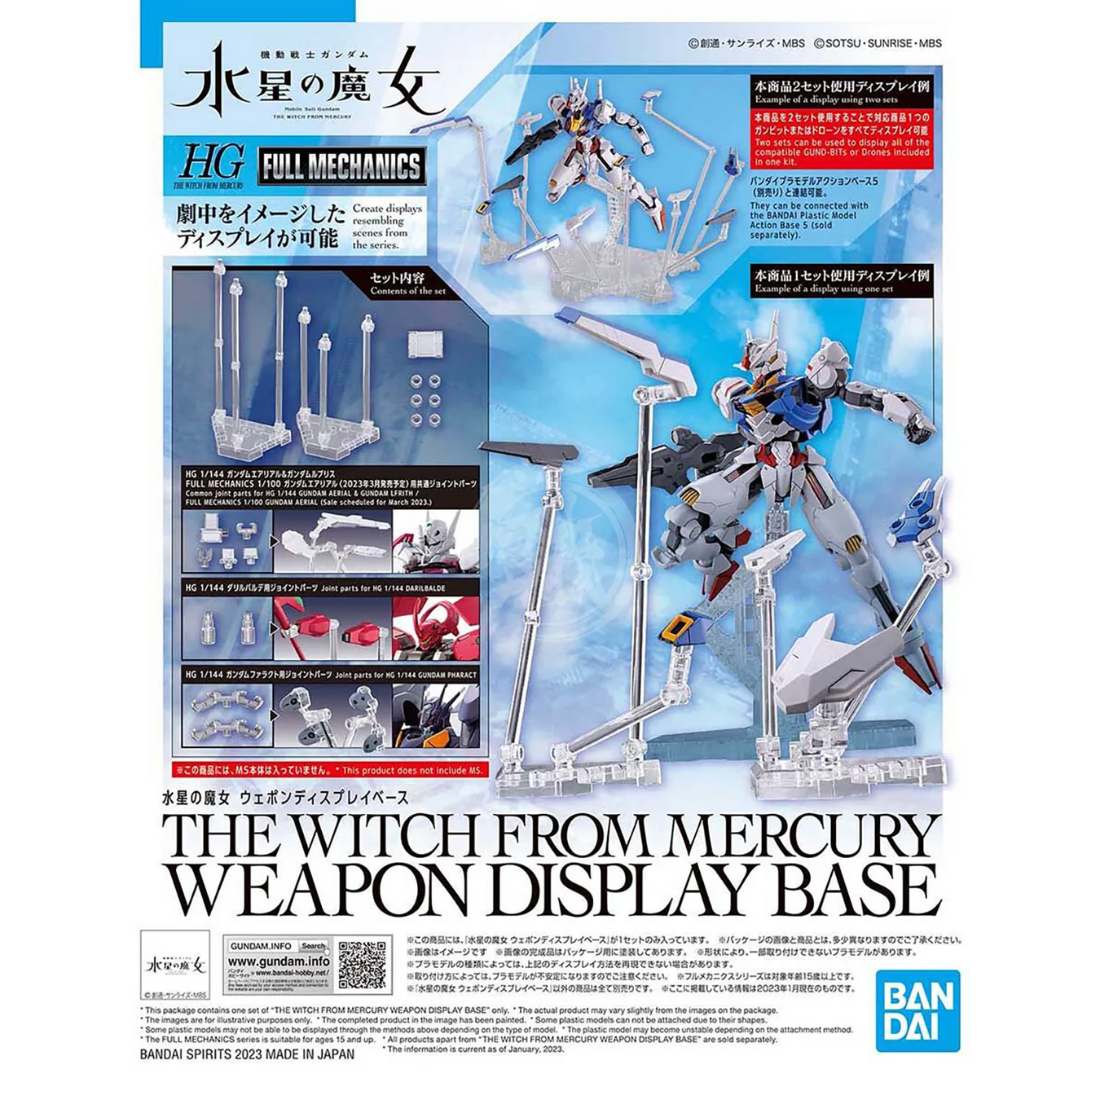 Gundam The Witch from Mercury Weapon Display Base #5064255 by Bandai